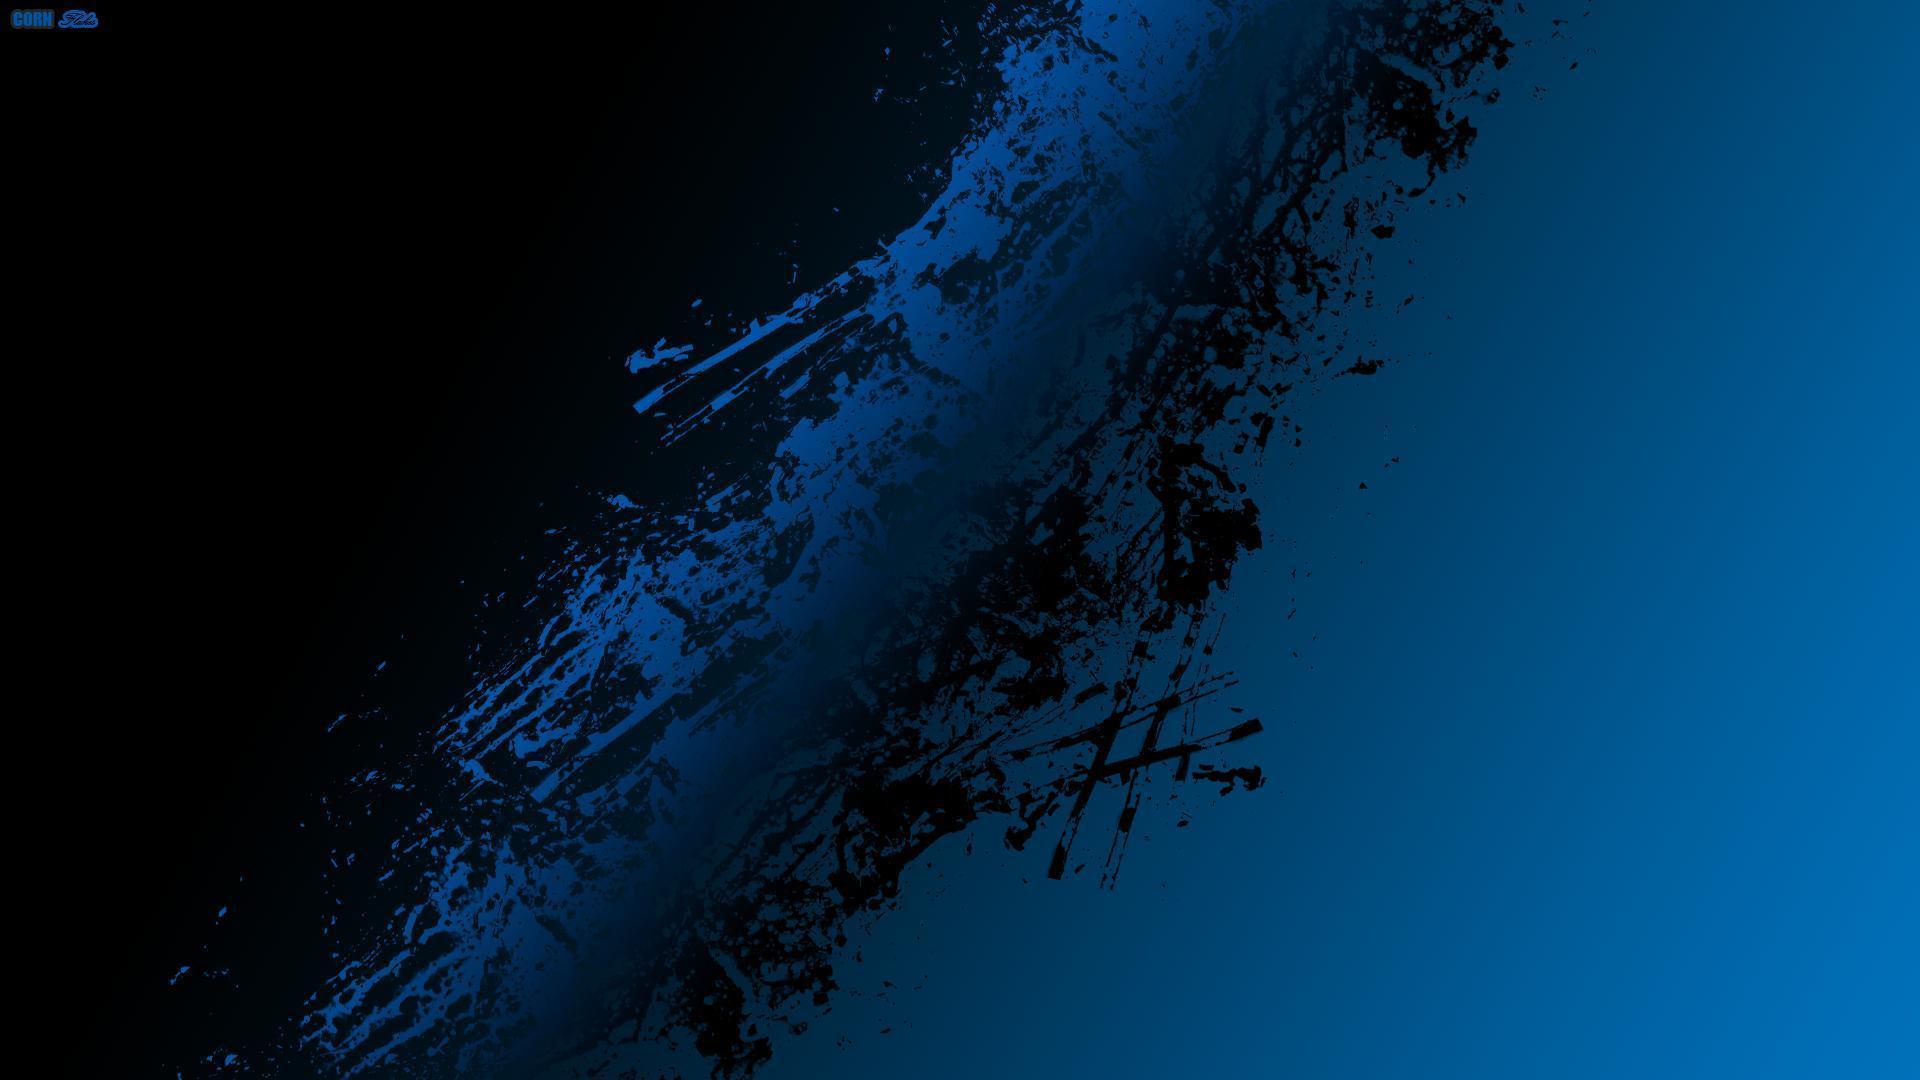 Black And Blue Abstract Wallpapers